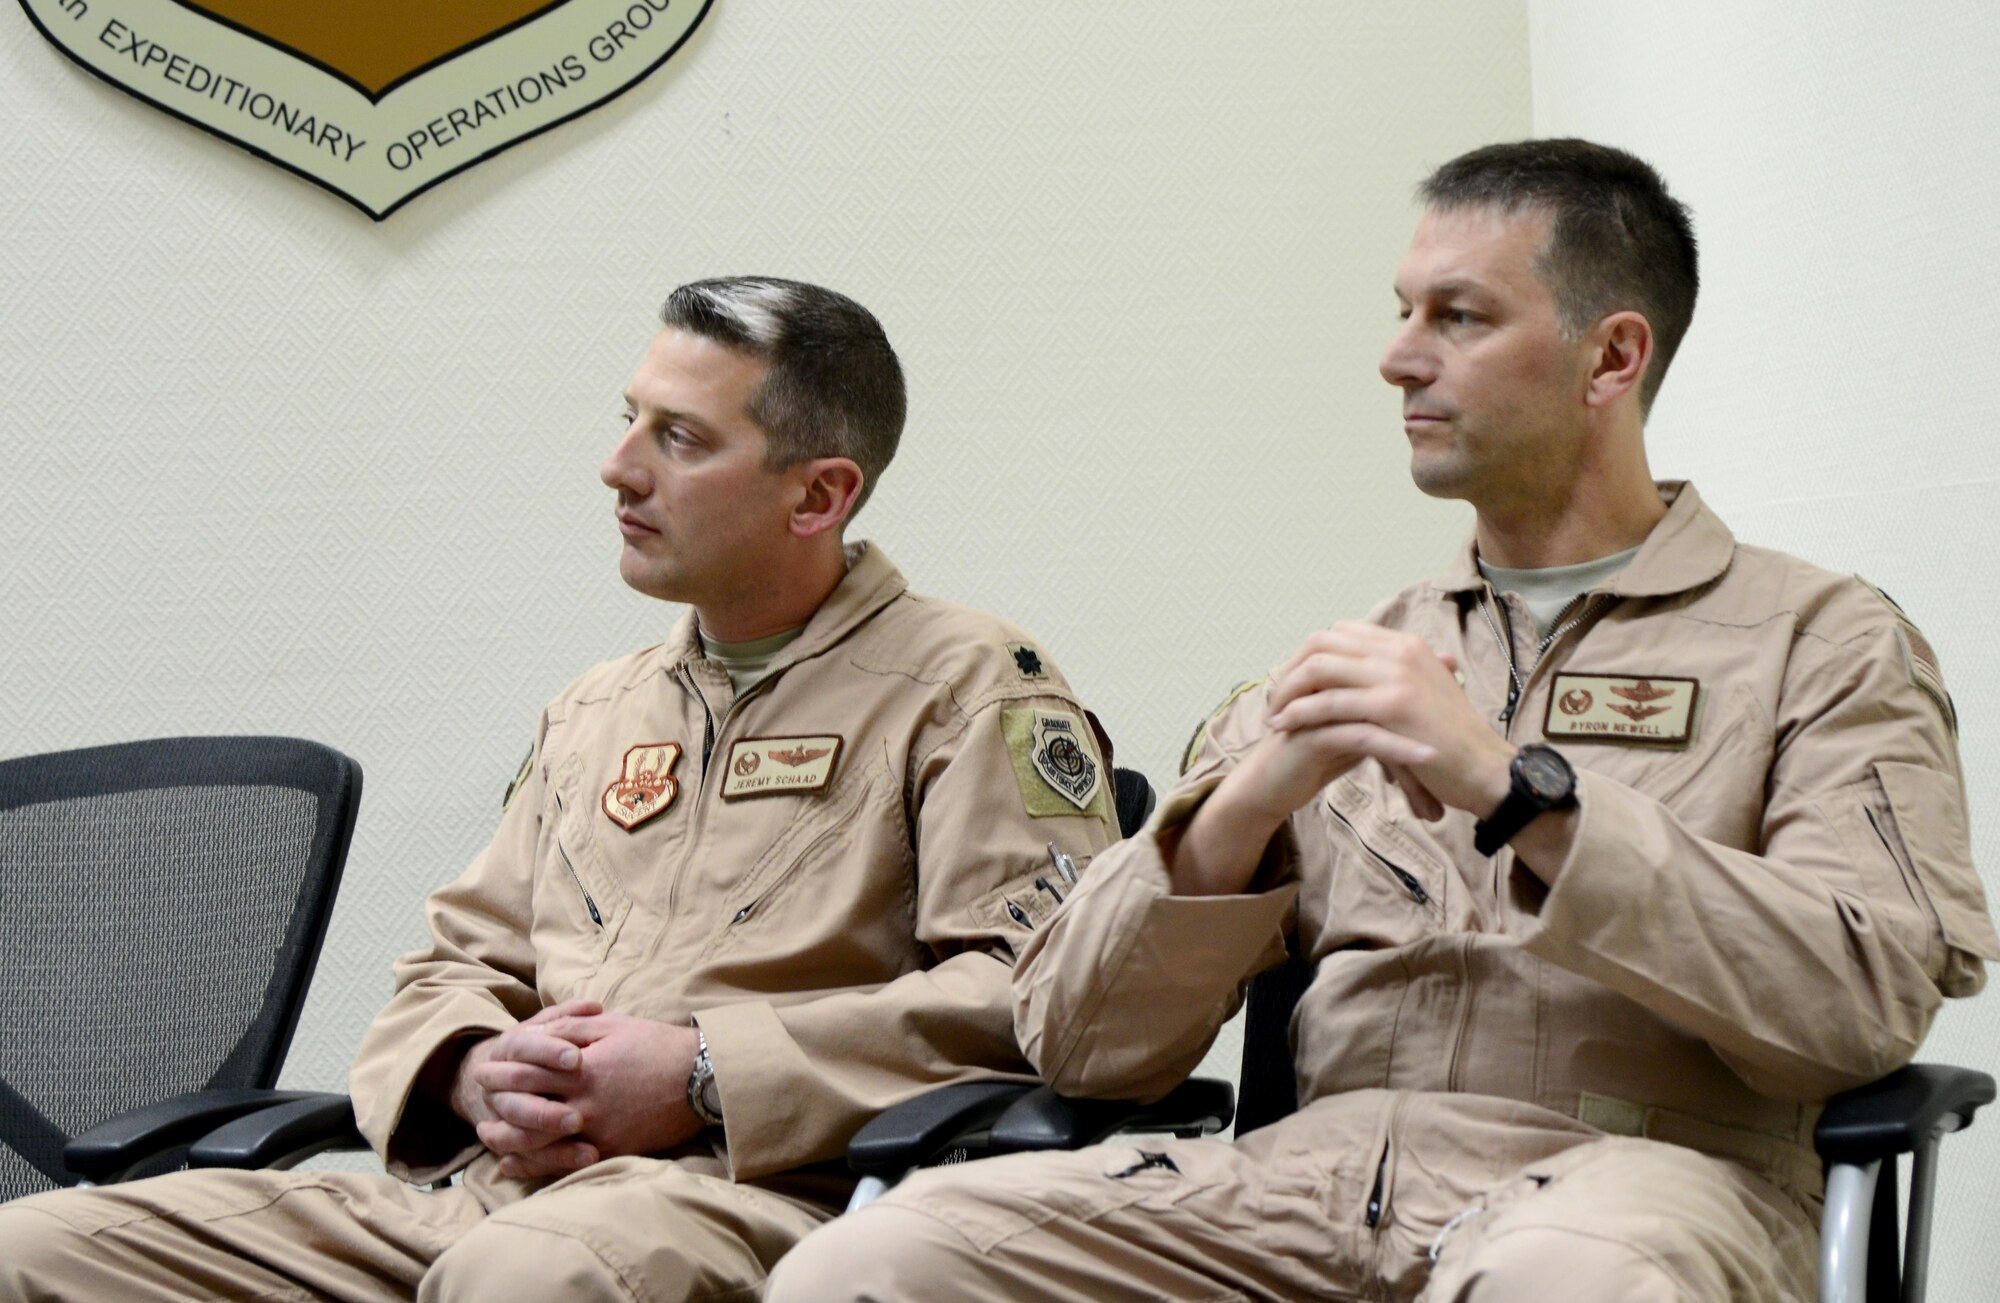 U.S. Air Force Lt. Cols. Jeremy Schaad, left, and Byron Newell listen to remarks from Col. Jim Dittus, 379th Expeditionary Operations Group commander, during a change of command ceremony, March 1, 2015, at Al Udeid Air Base, Qatar. During the ceremony, Newell assumed command of the 746th Expeditionary Airlift Squadron from Schaad. (U.S. Air Force photo by Senior Airman Kia Atkins)